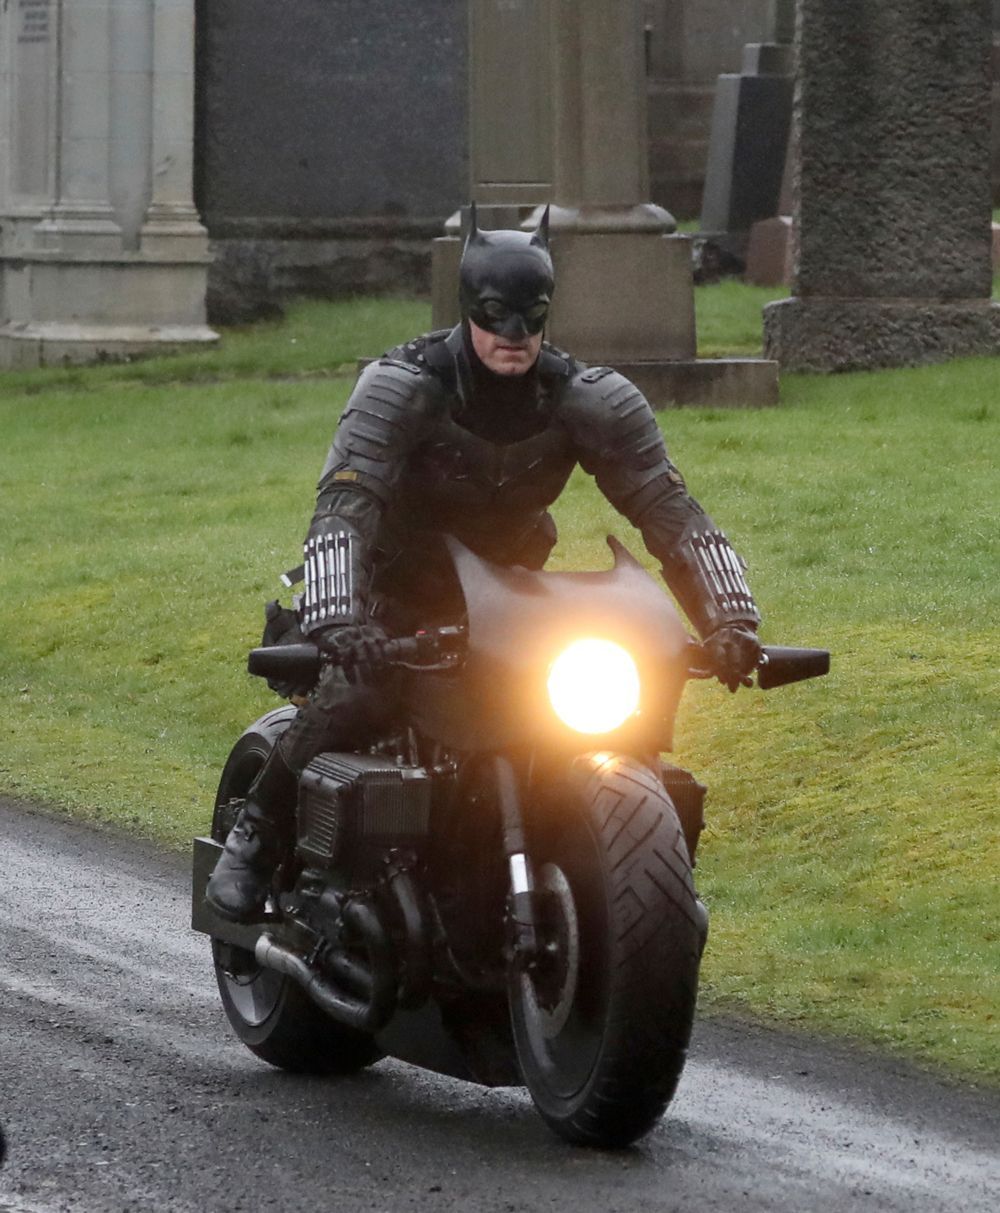 Close up of the Batcycle from The Batman in the movie 2021. Source Variety